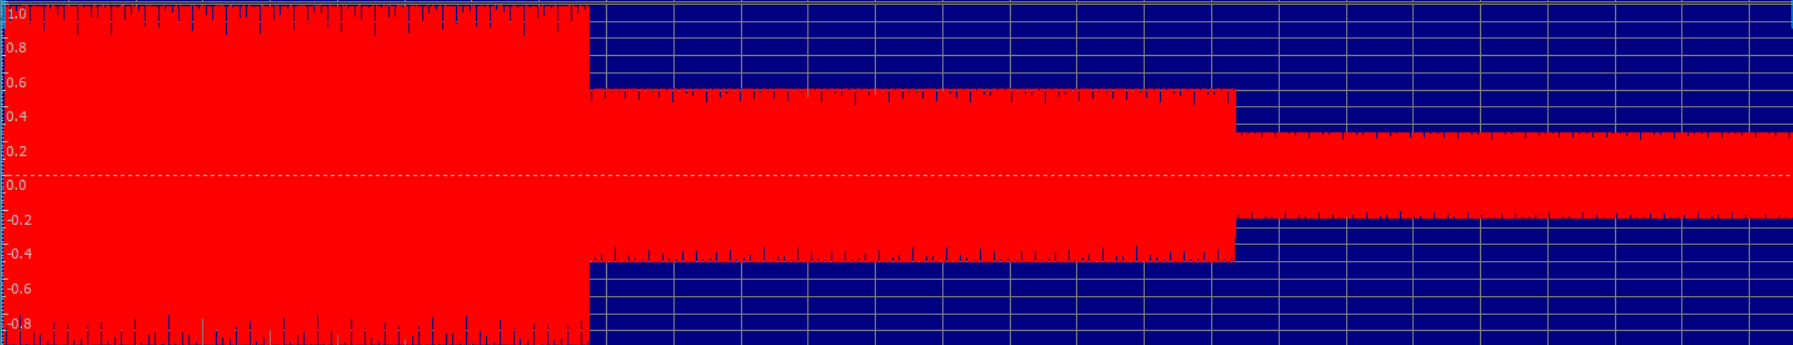 Xaudio sound intensity and inverse square distance